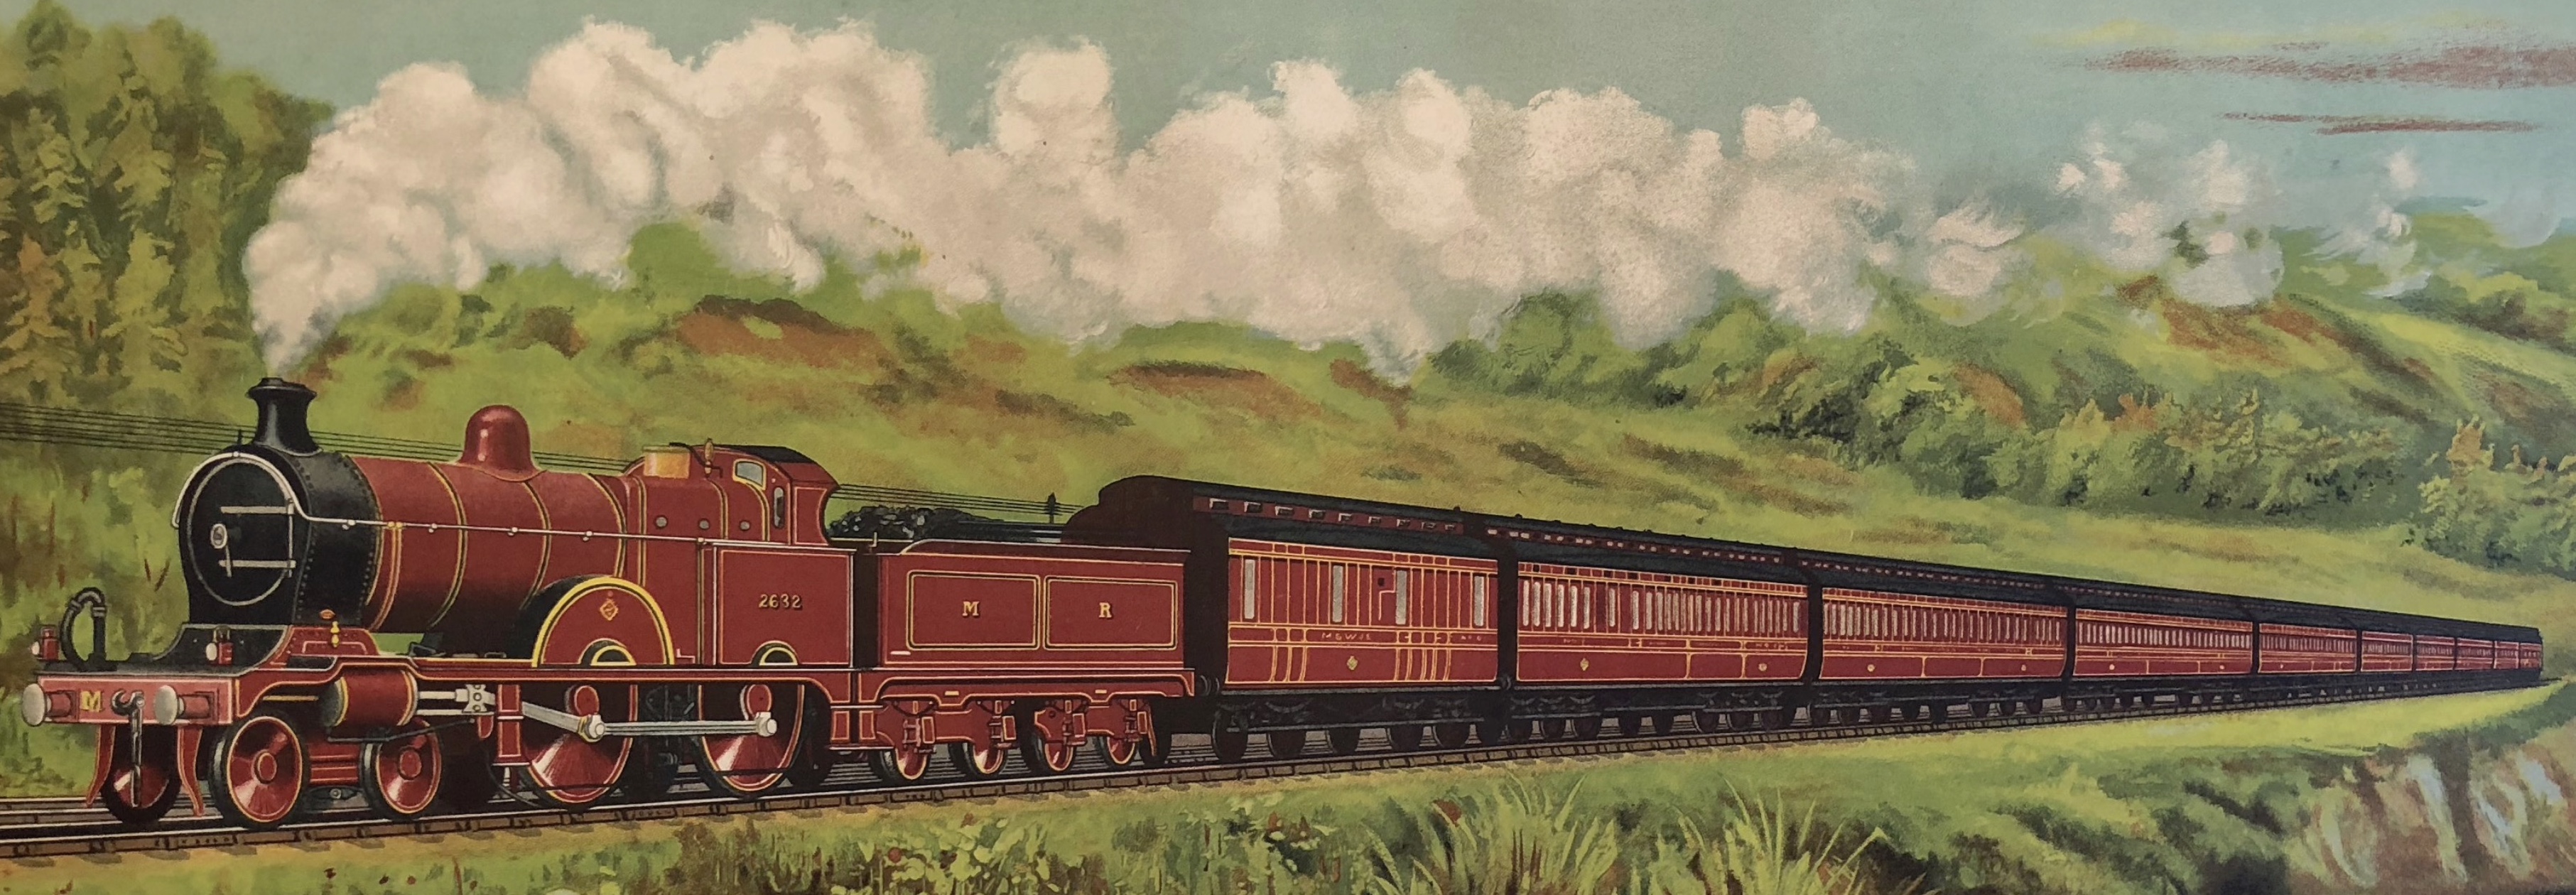 A Colourful Painting of a Midland Railway Express Passenger Train in a Rural Setting